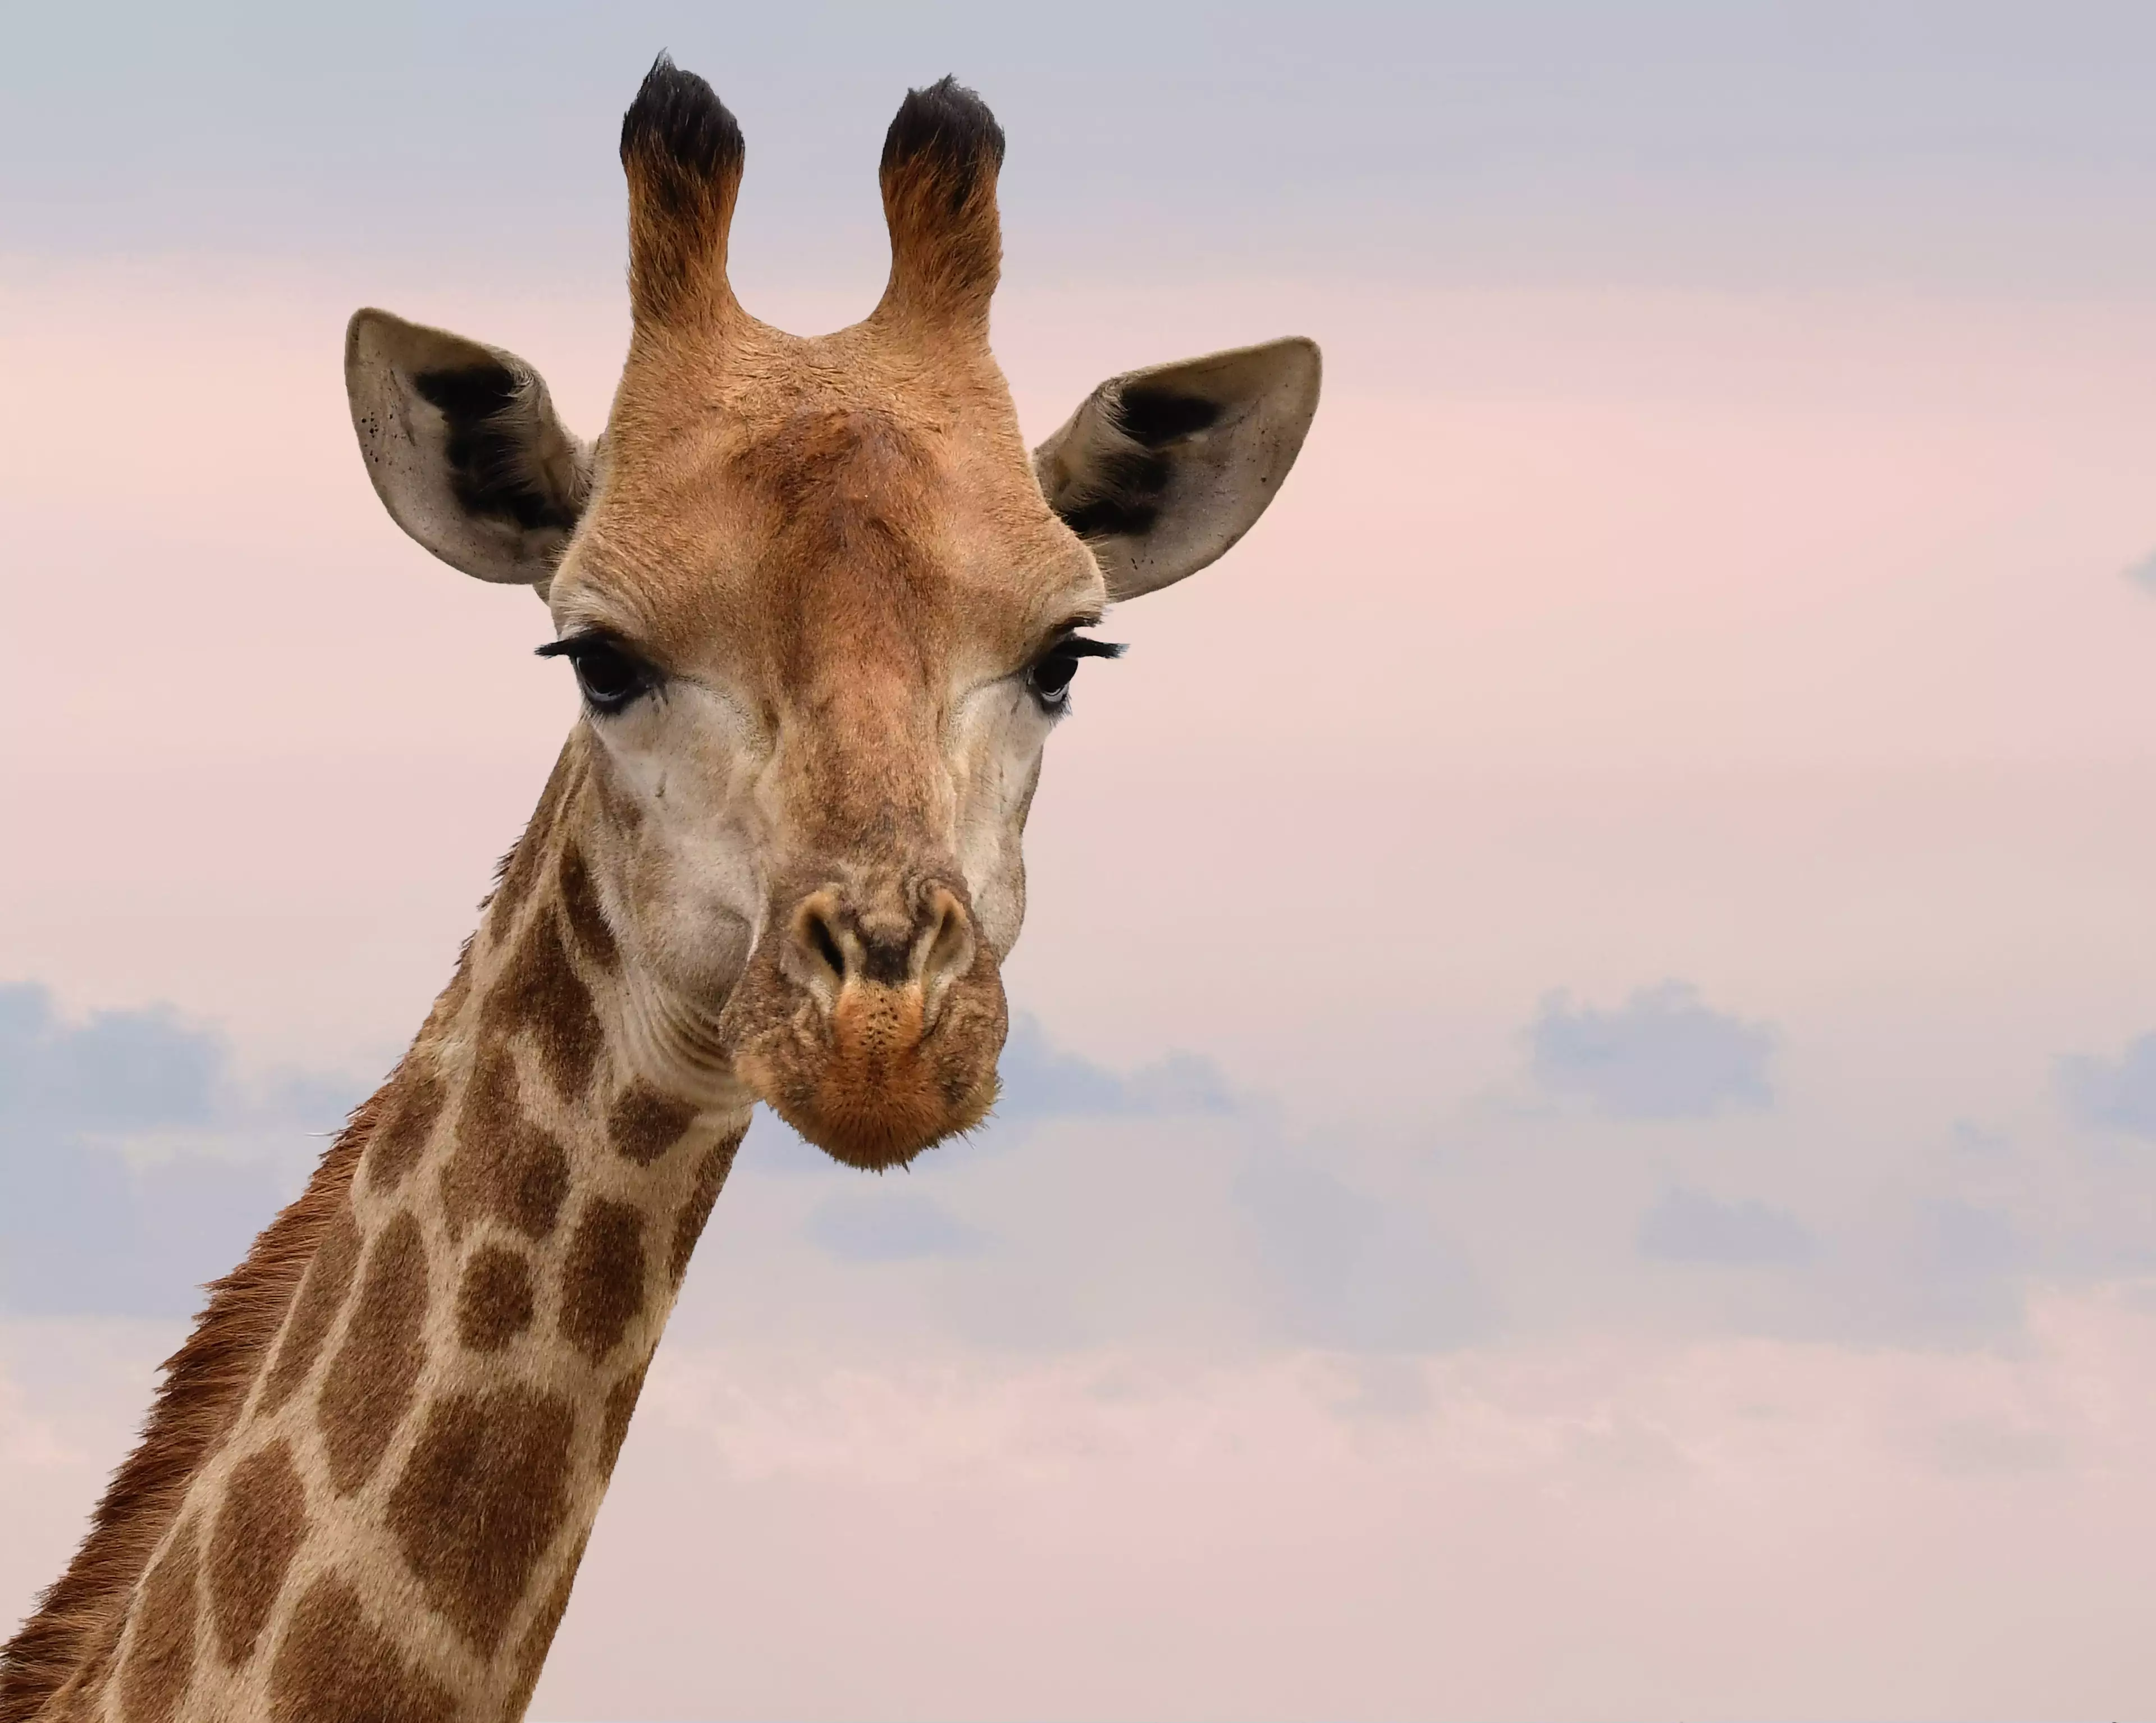 Giraffes are hunted for their meat and tails. (